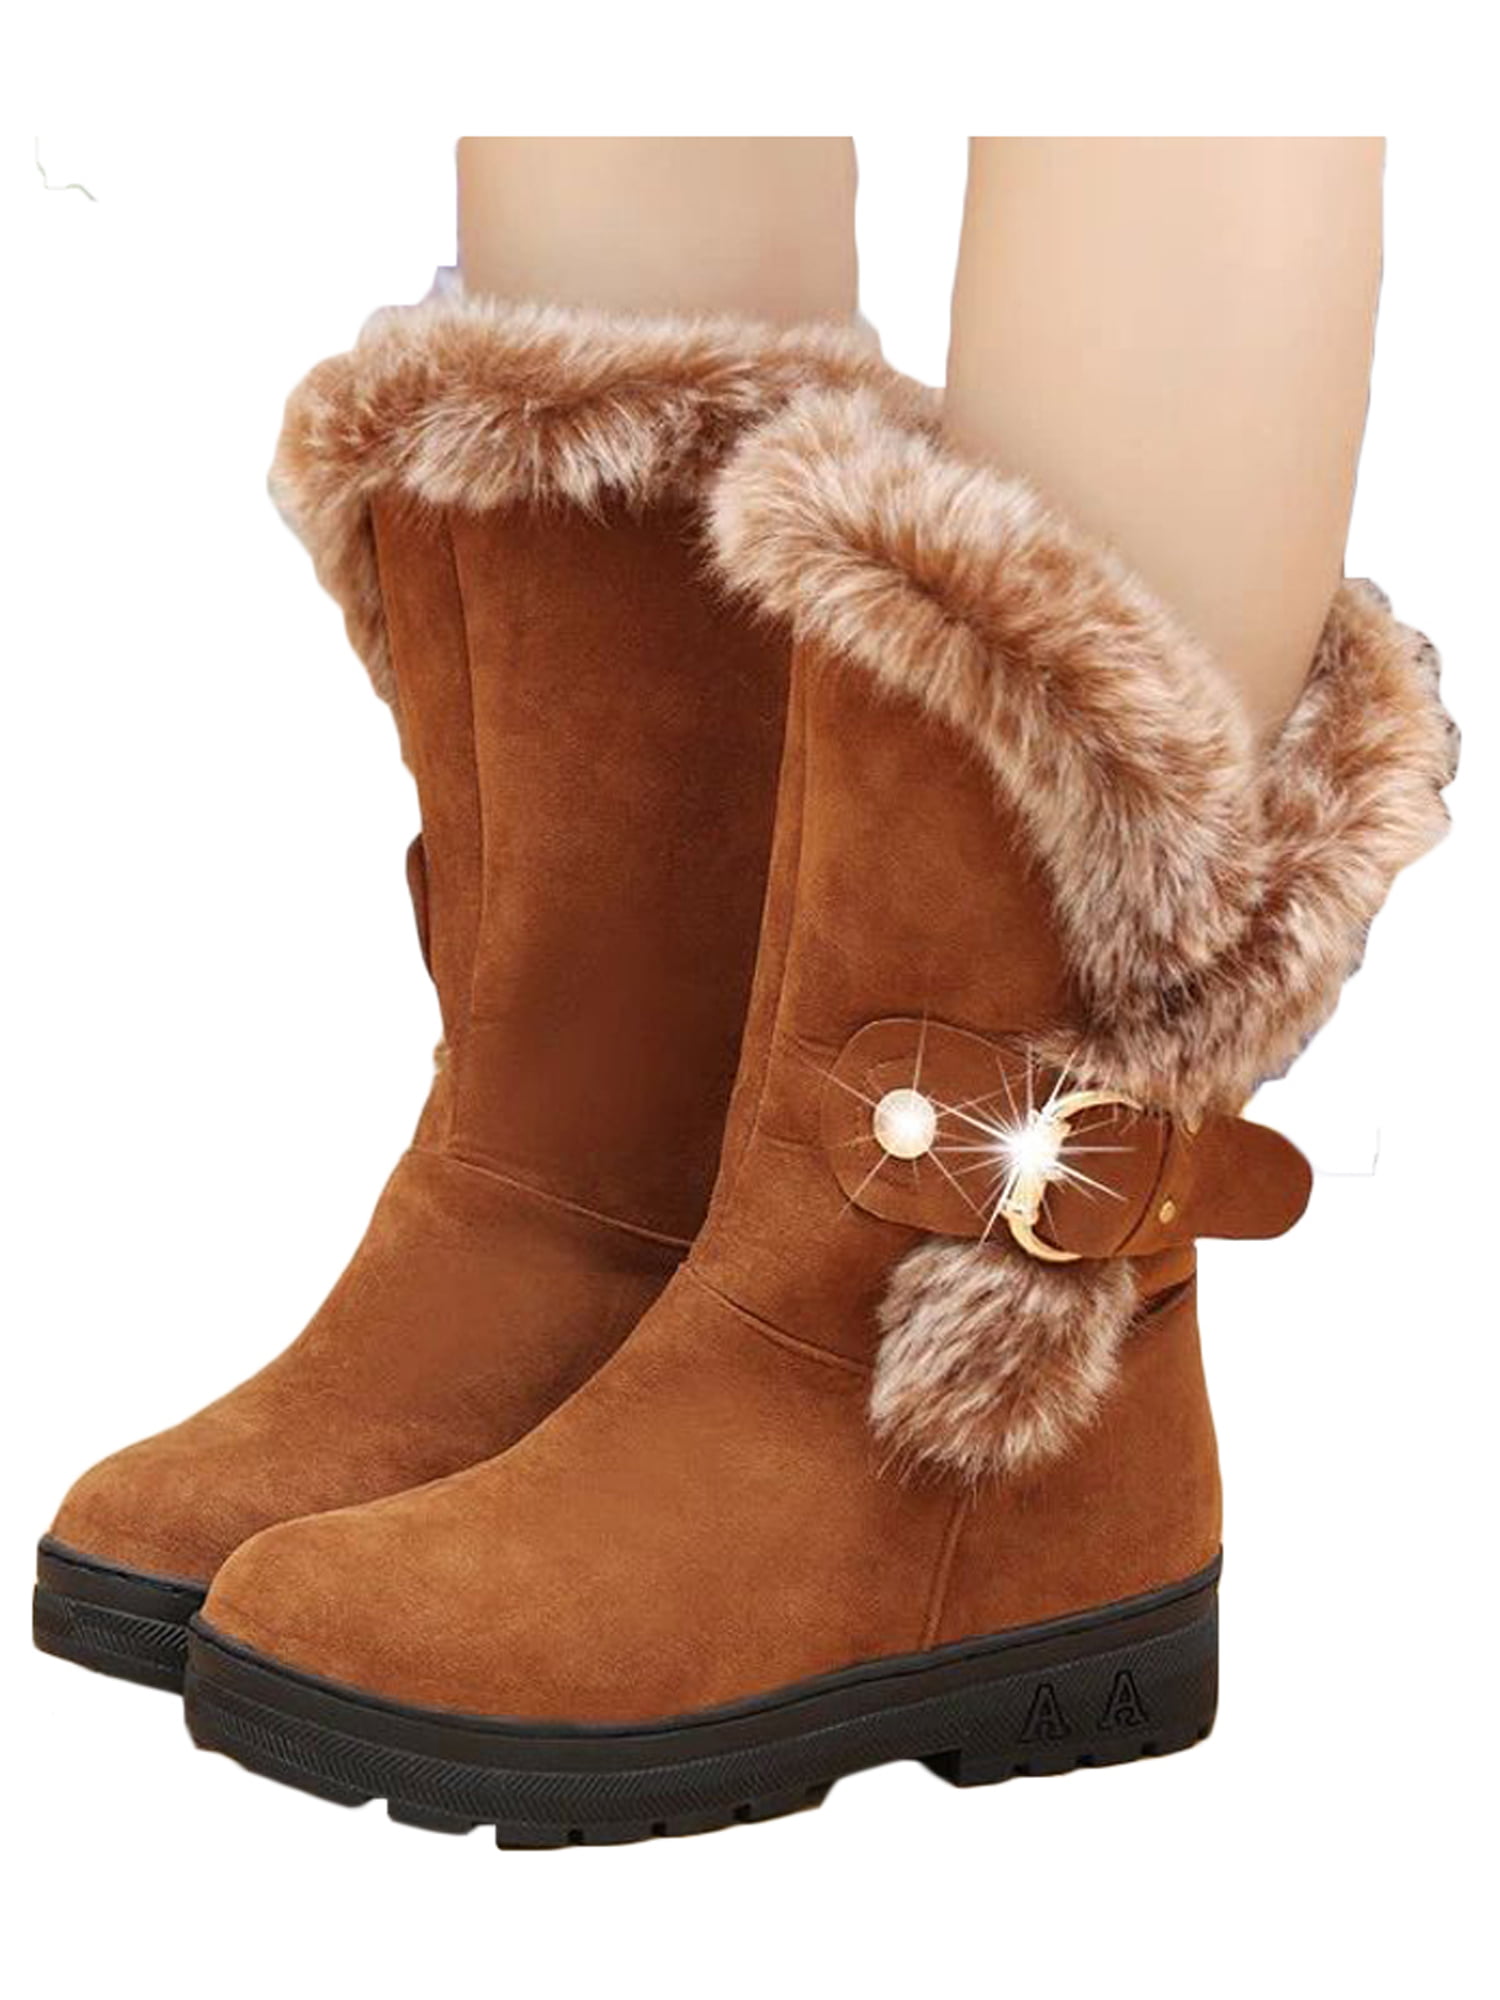 Womens Fur Lined Chunky Block Heel Buckle Suede Leather Winter Biker Ankle Boots